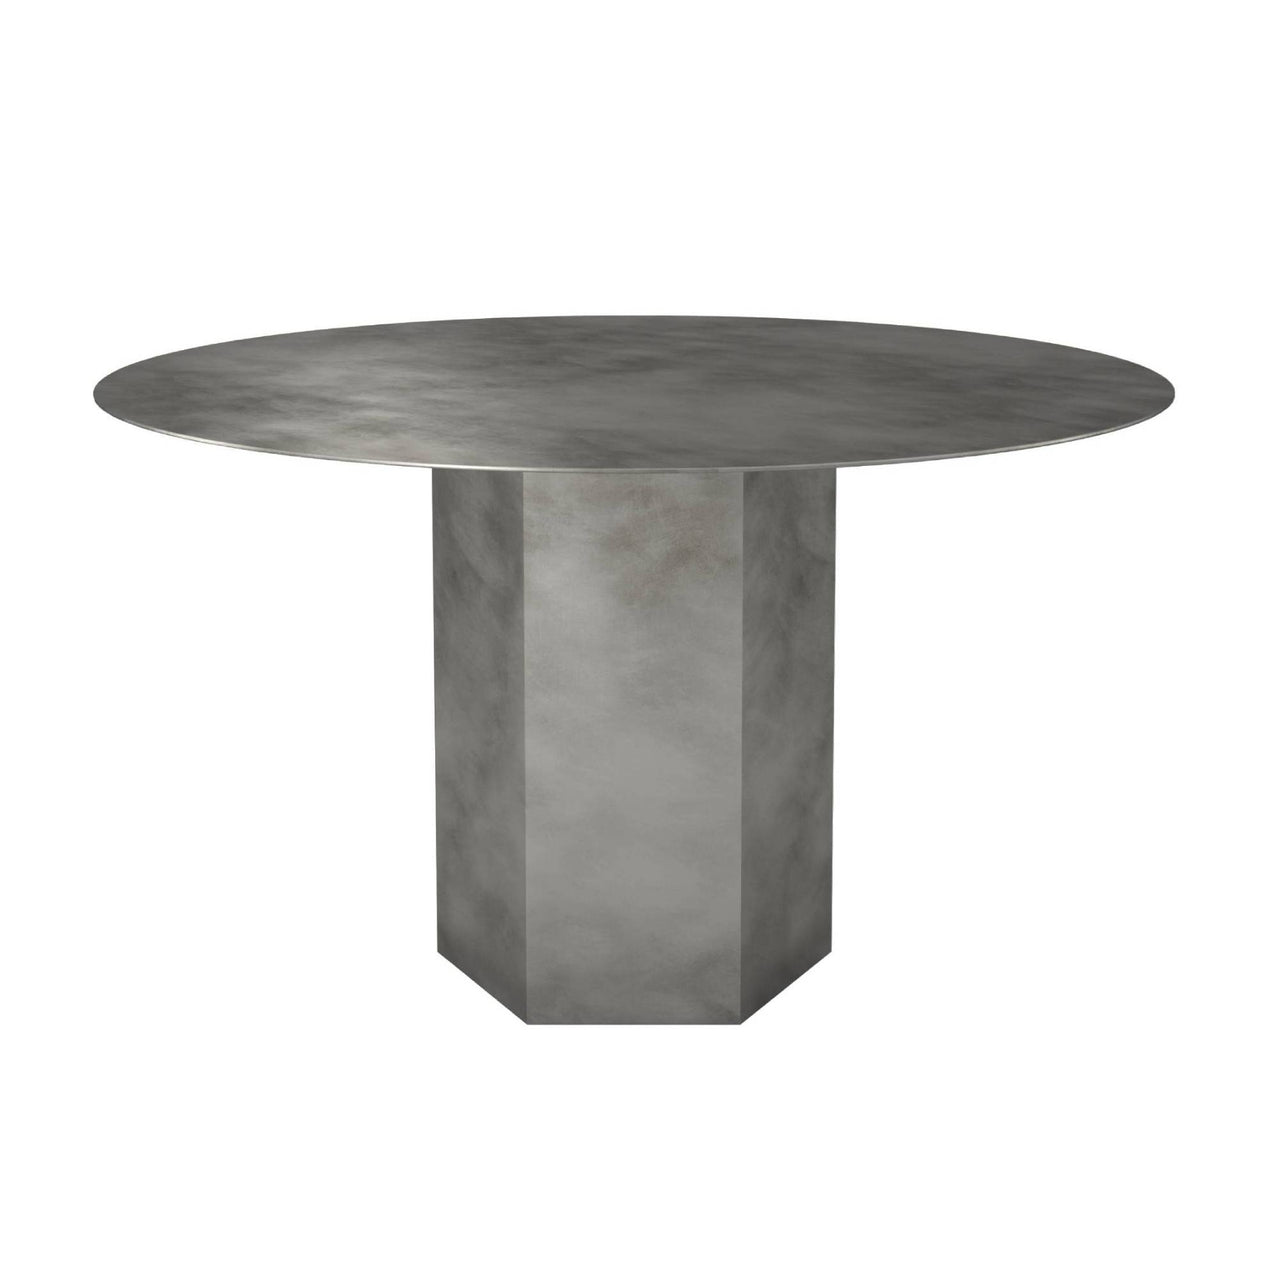 Epic Round Dining Table: Steel + Misty Grey